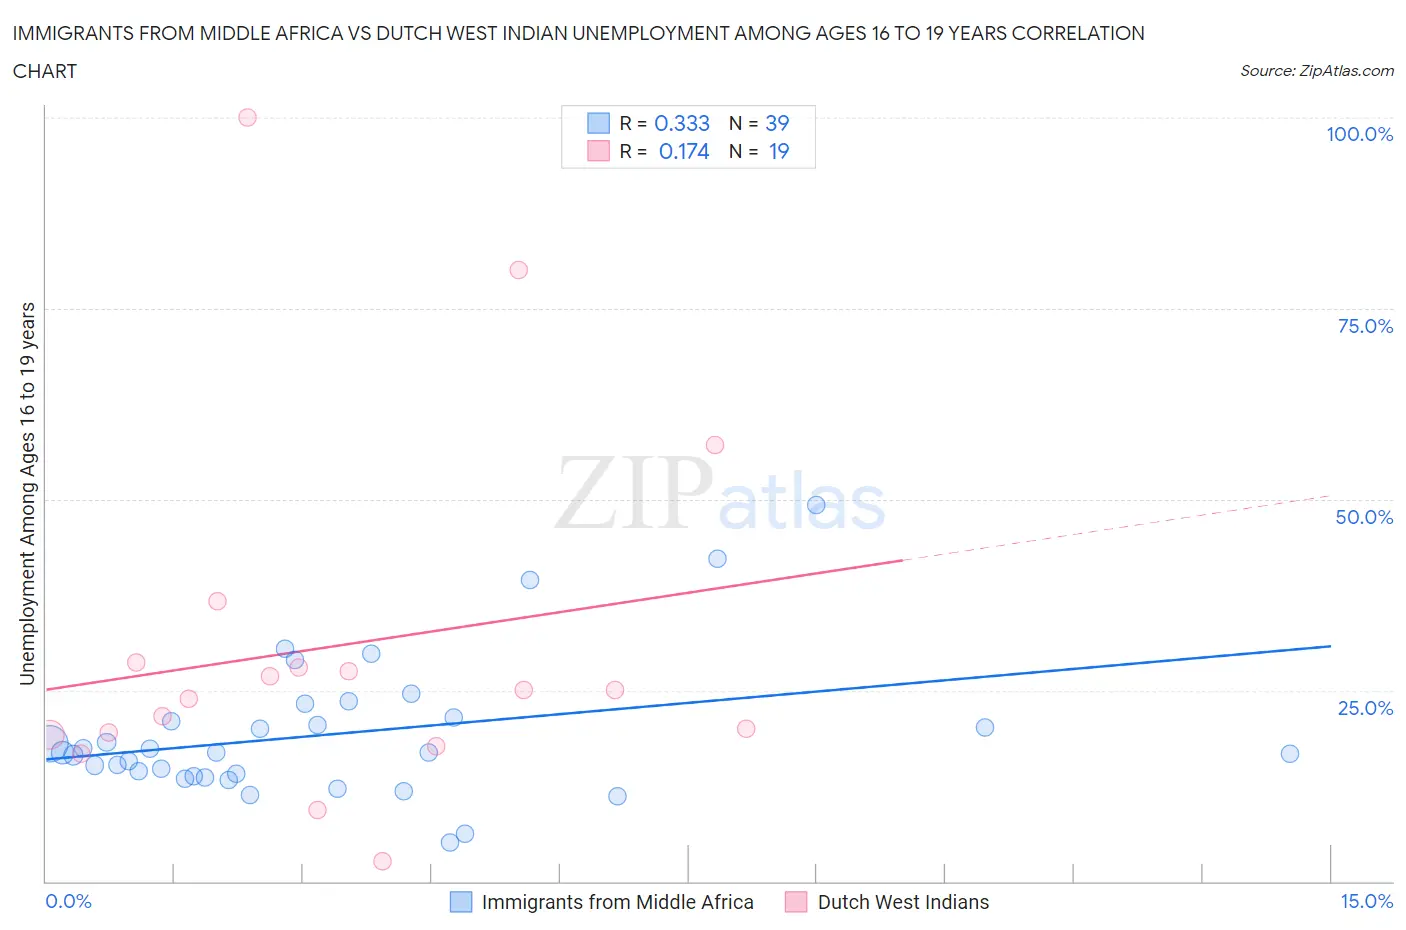 Immigrants from Middle Africa vs Dutch West Indian Unemployment Among Ages 16 to 19 years